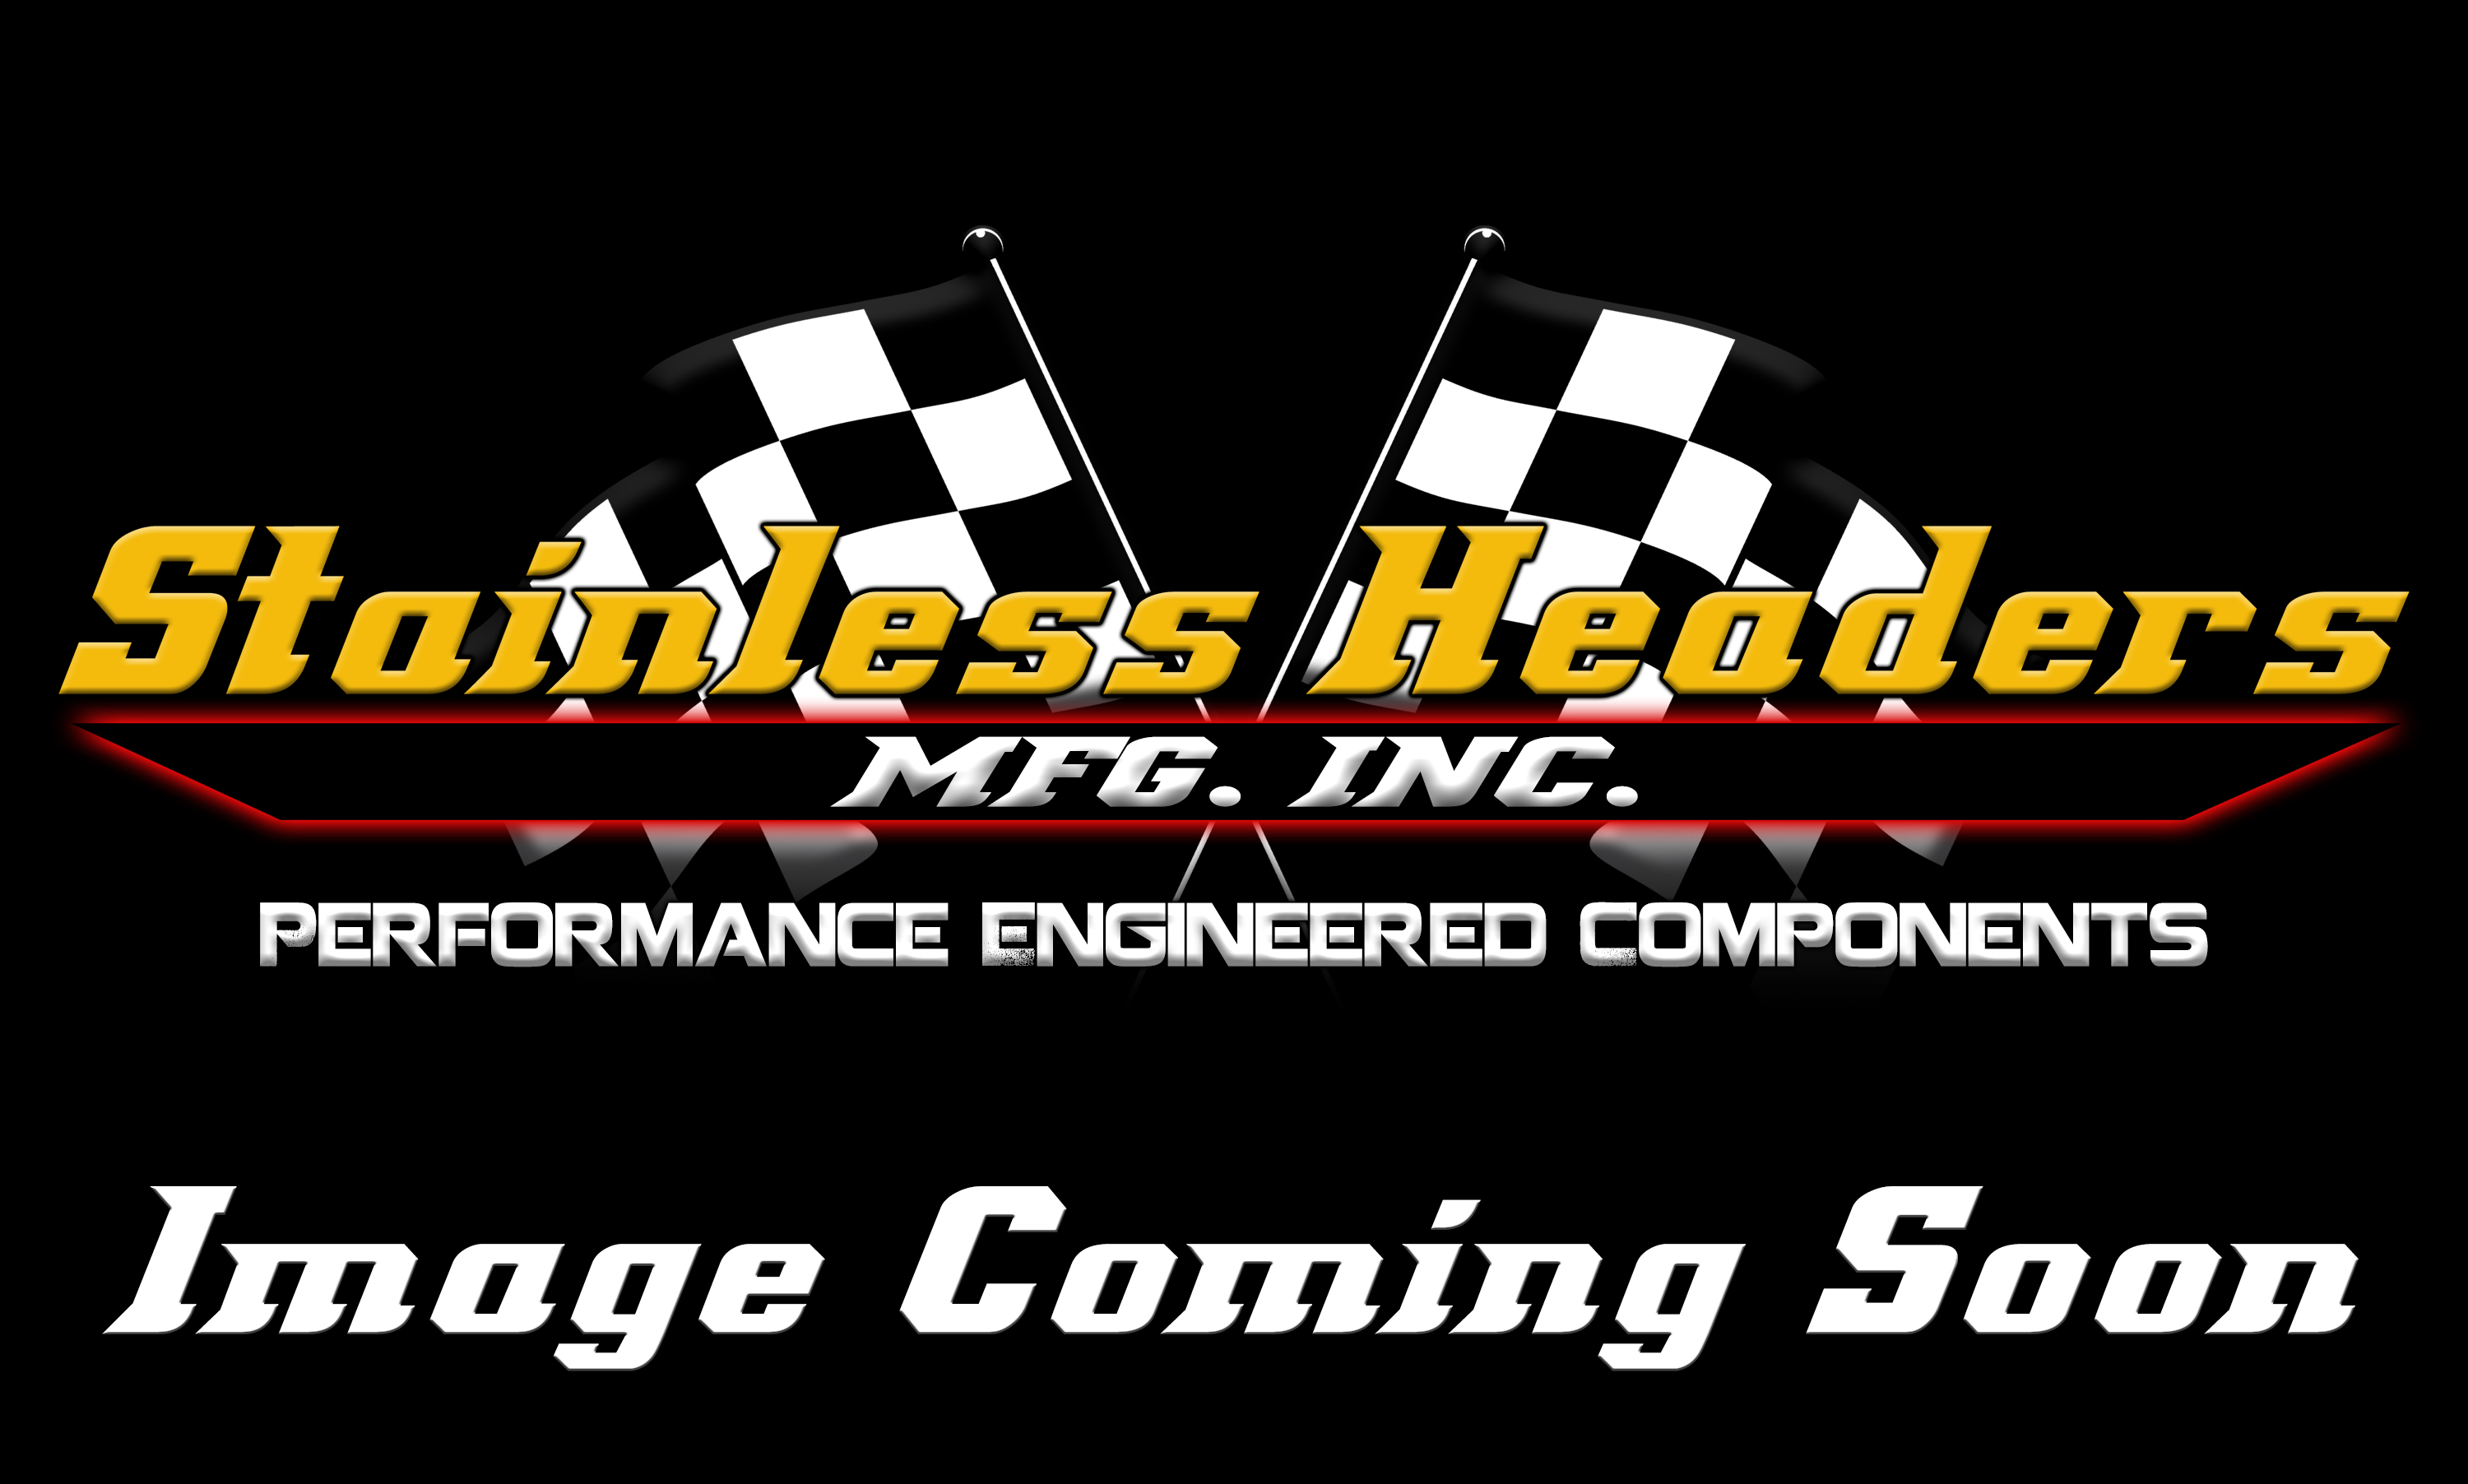 CompTurbo Technology Turbochargers - Comp Turbo Journal Bearing Turbochargers - CompTurbo Technologies - CTR3793S-6467 Reverse Rotation 360 Journal Bearing Turbocharger (925 HP)